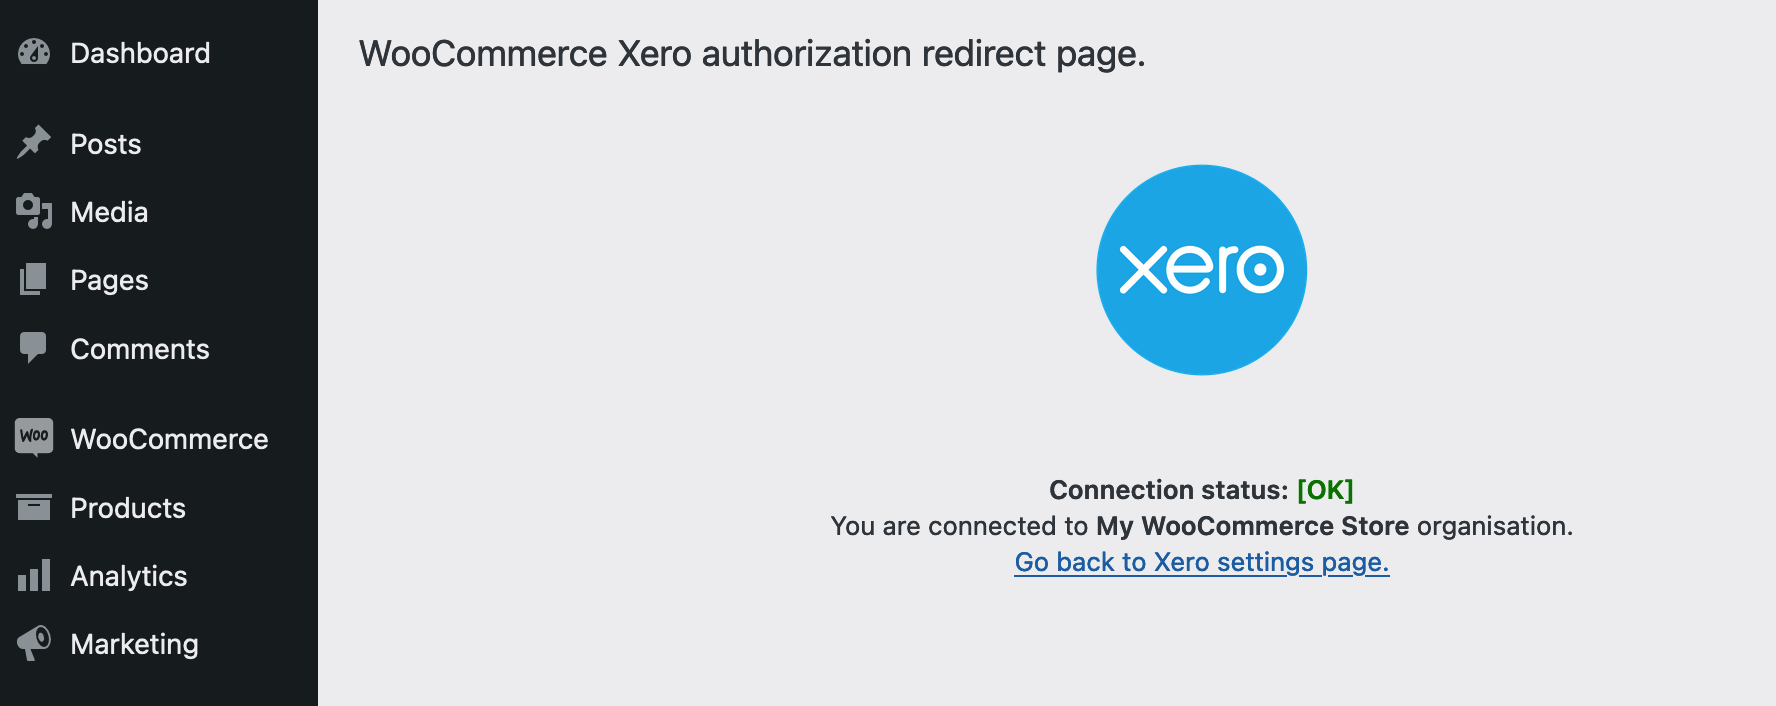 After clicking connect you will be taken back to the WooCommerce Xero page that will confirm the status of the connection.